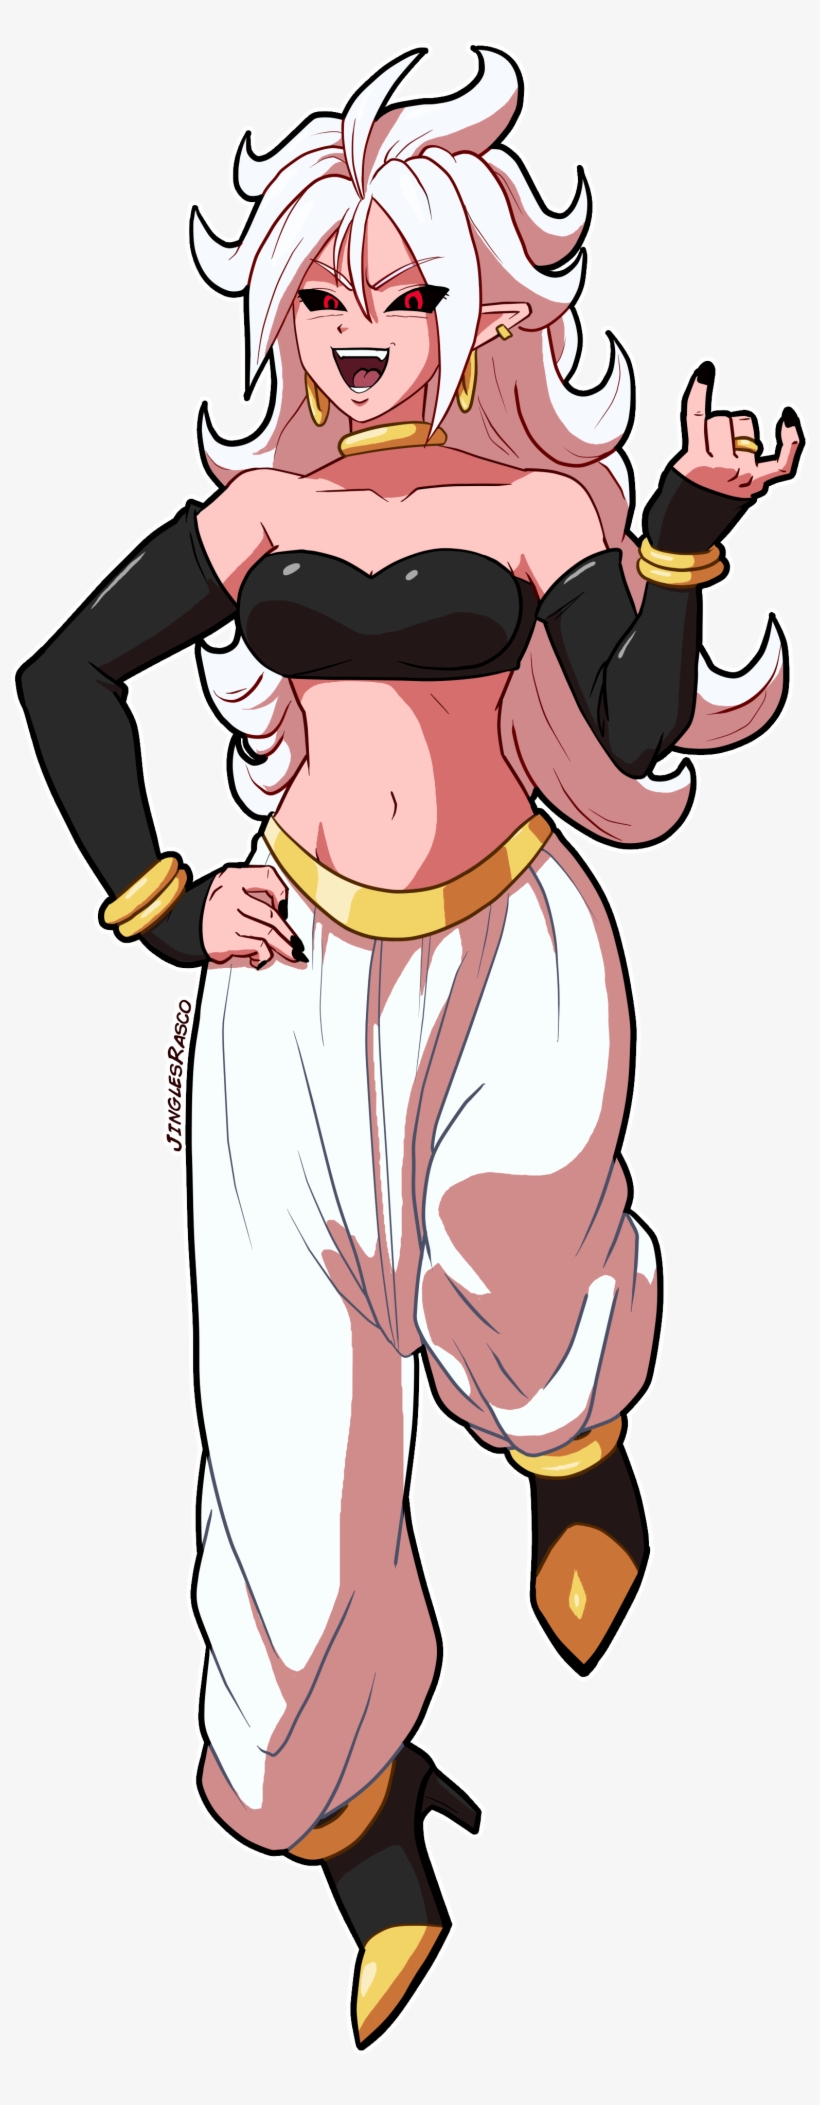 I Tried Drawing Android 21 - Android 21 Png, transparent png #1868771